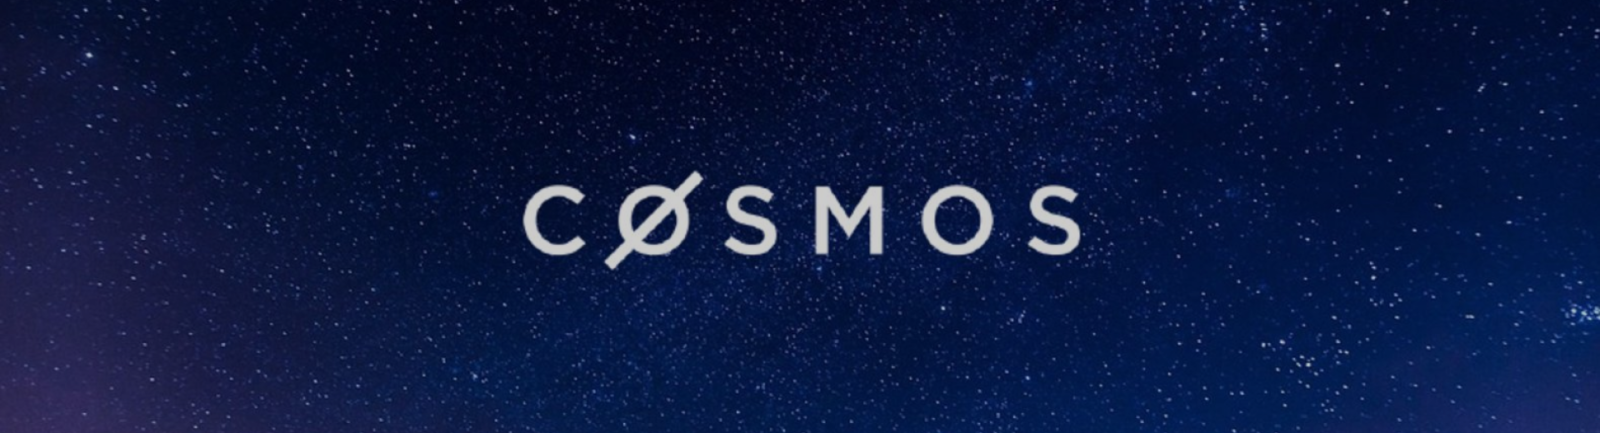 Hire Cosmos Developers